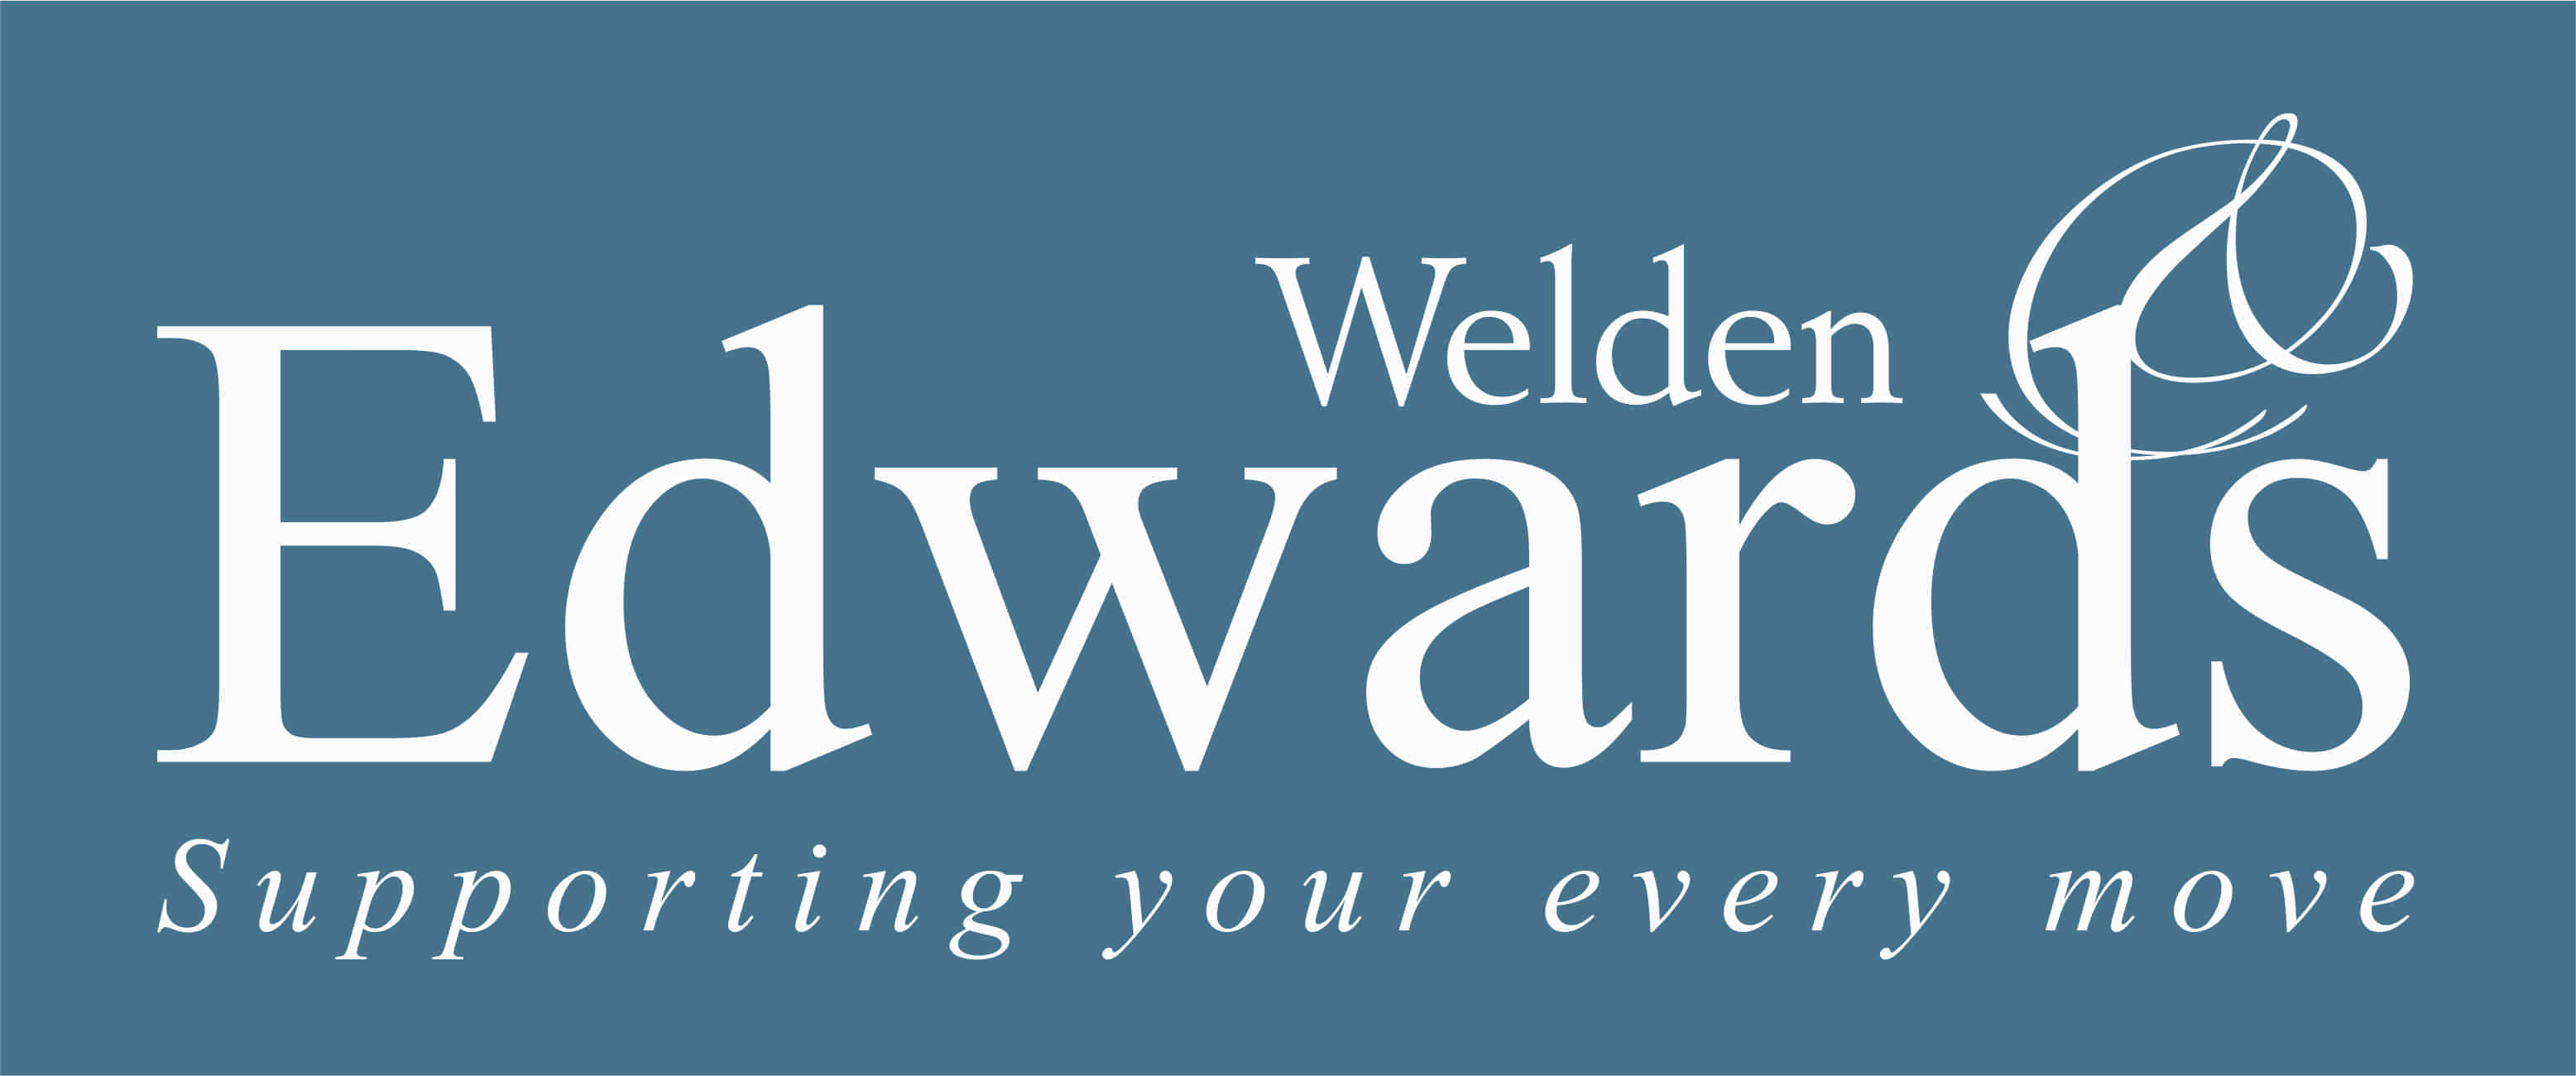 Welden and Edwards : Letting agents in Crediton Devon